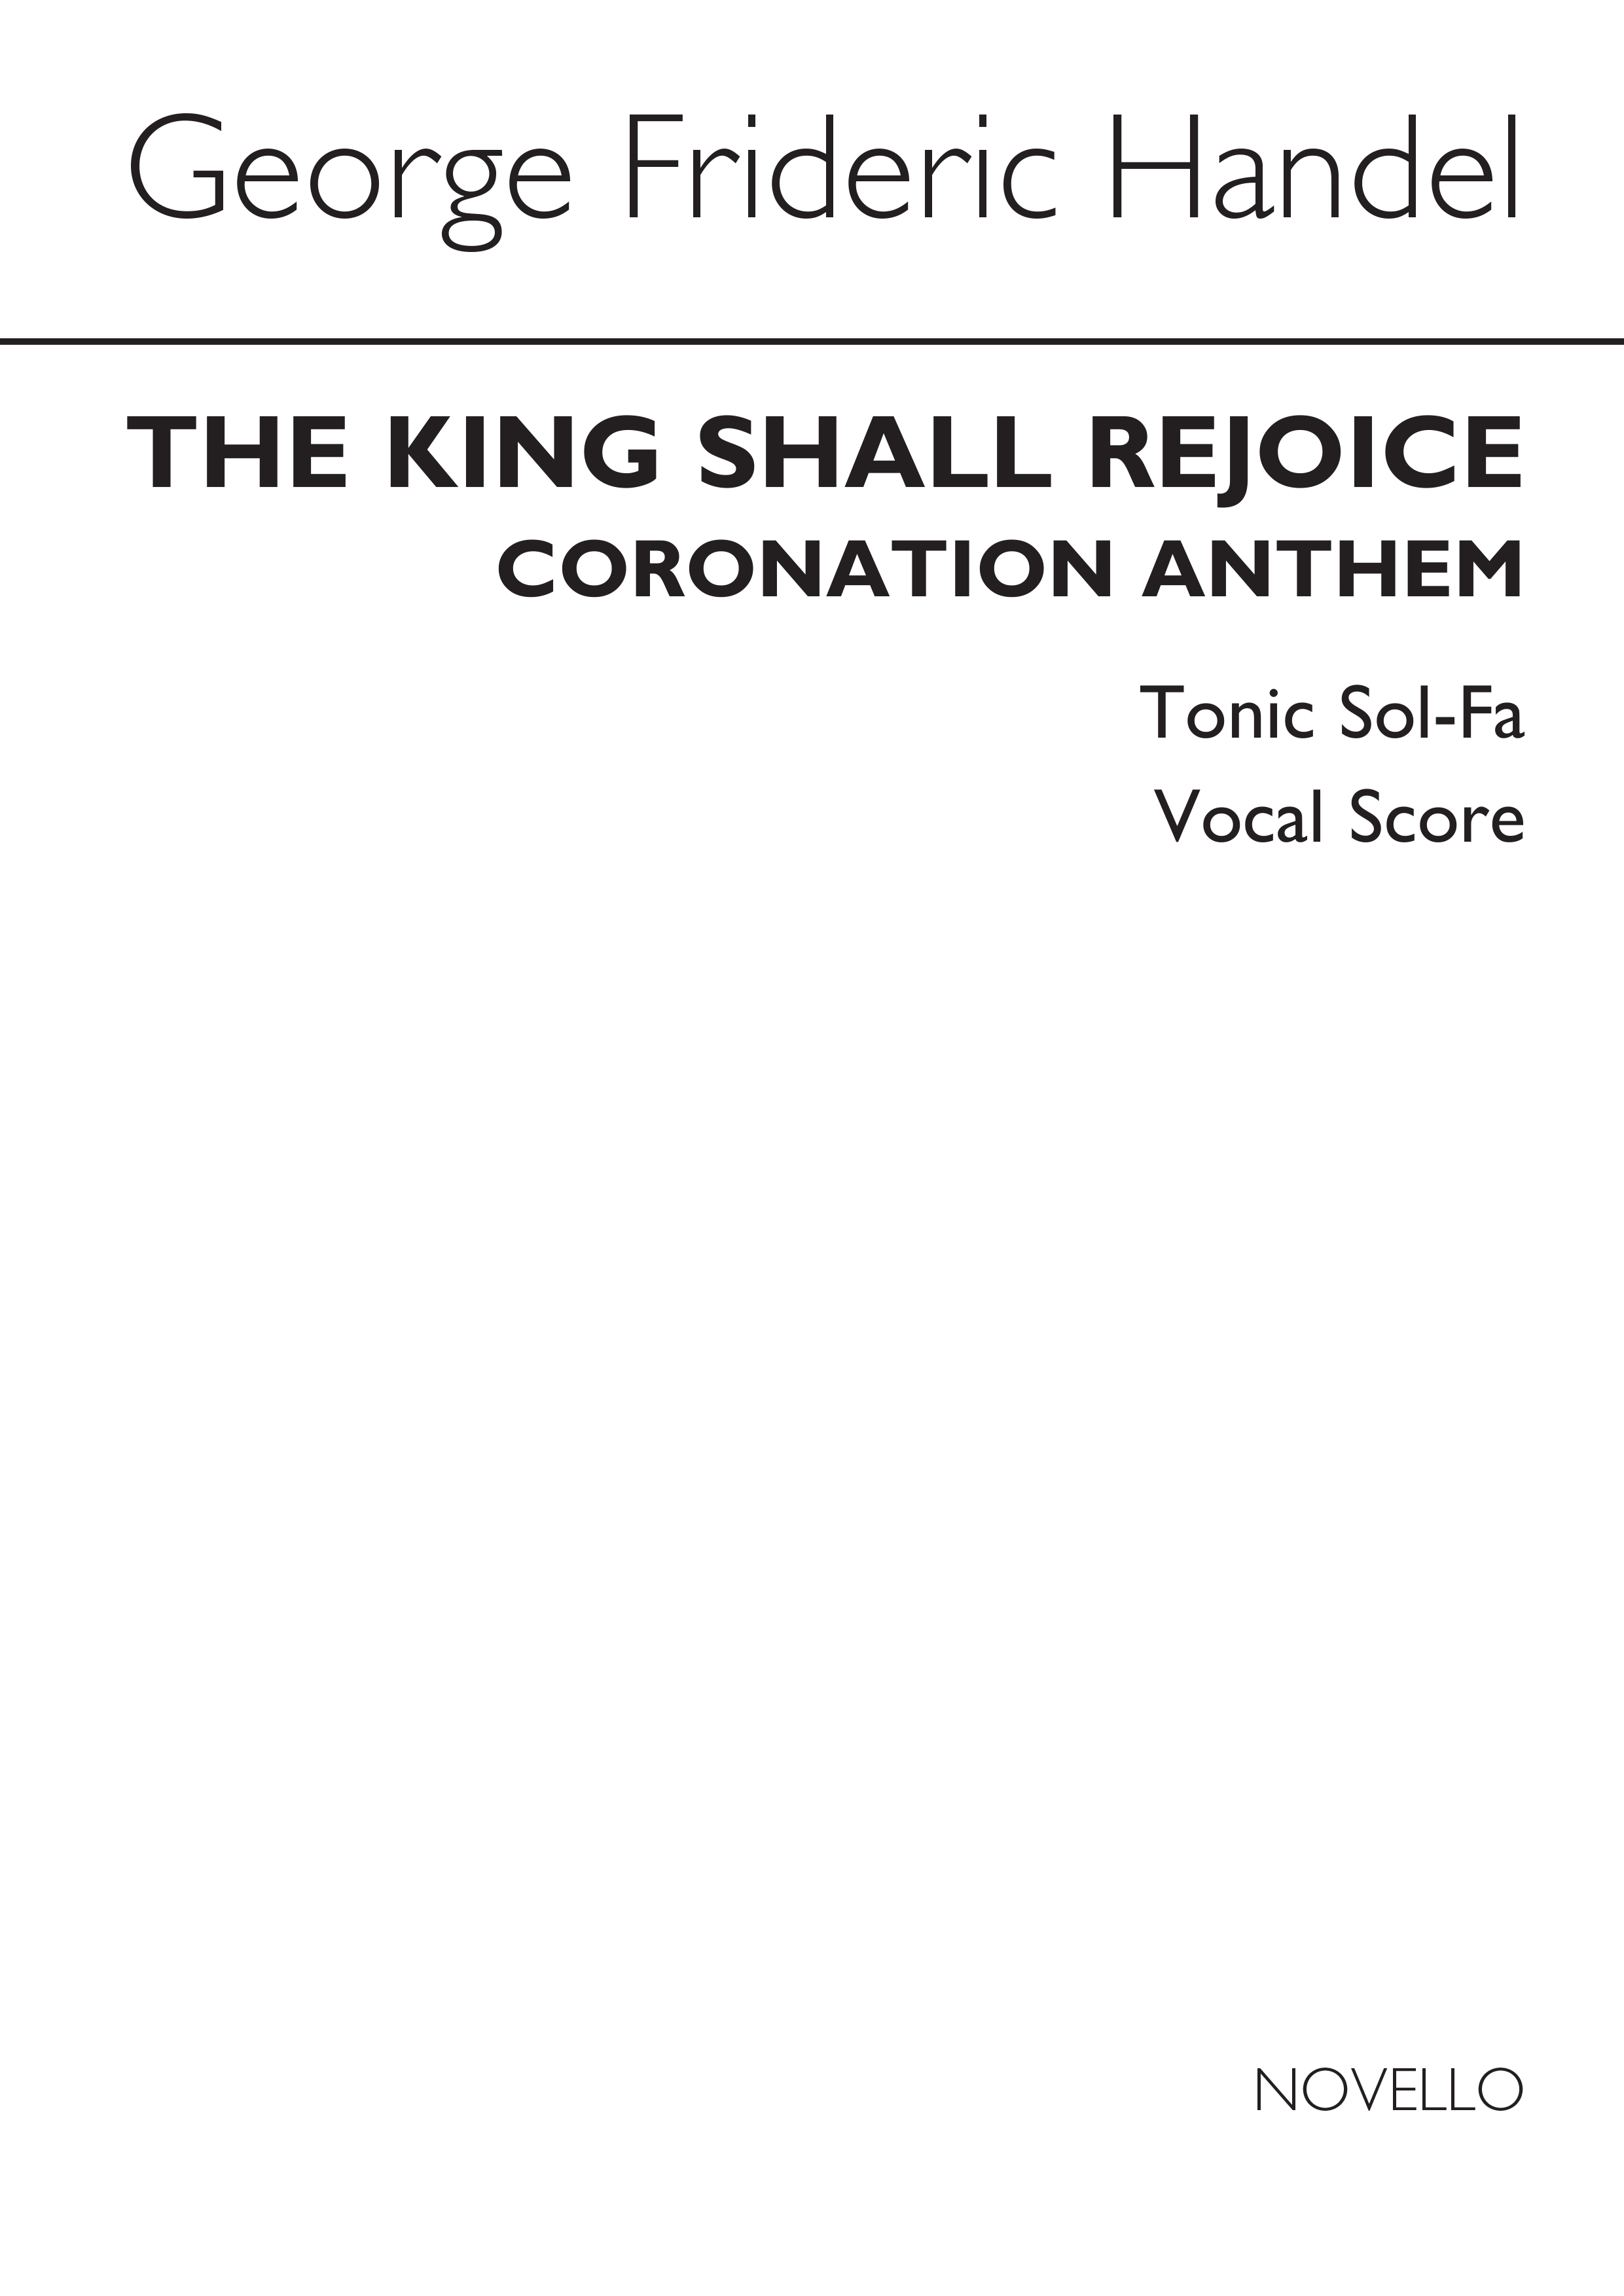 Georg Friedrich Hndel: The King Shall Rejoice (Tonic Sol-Fa): Vocal: Vocal